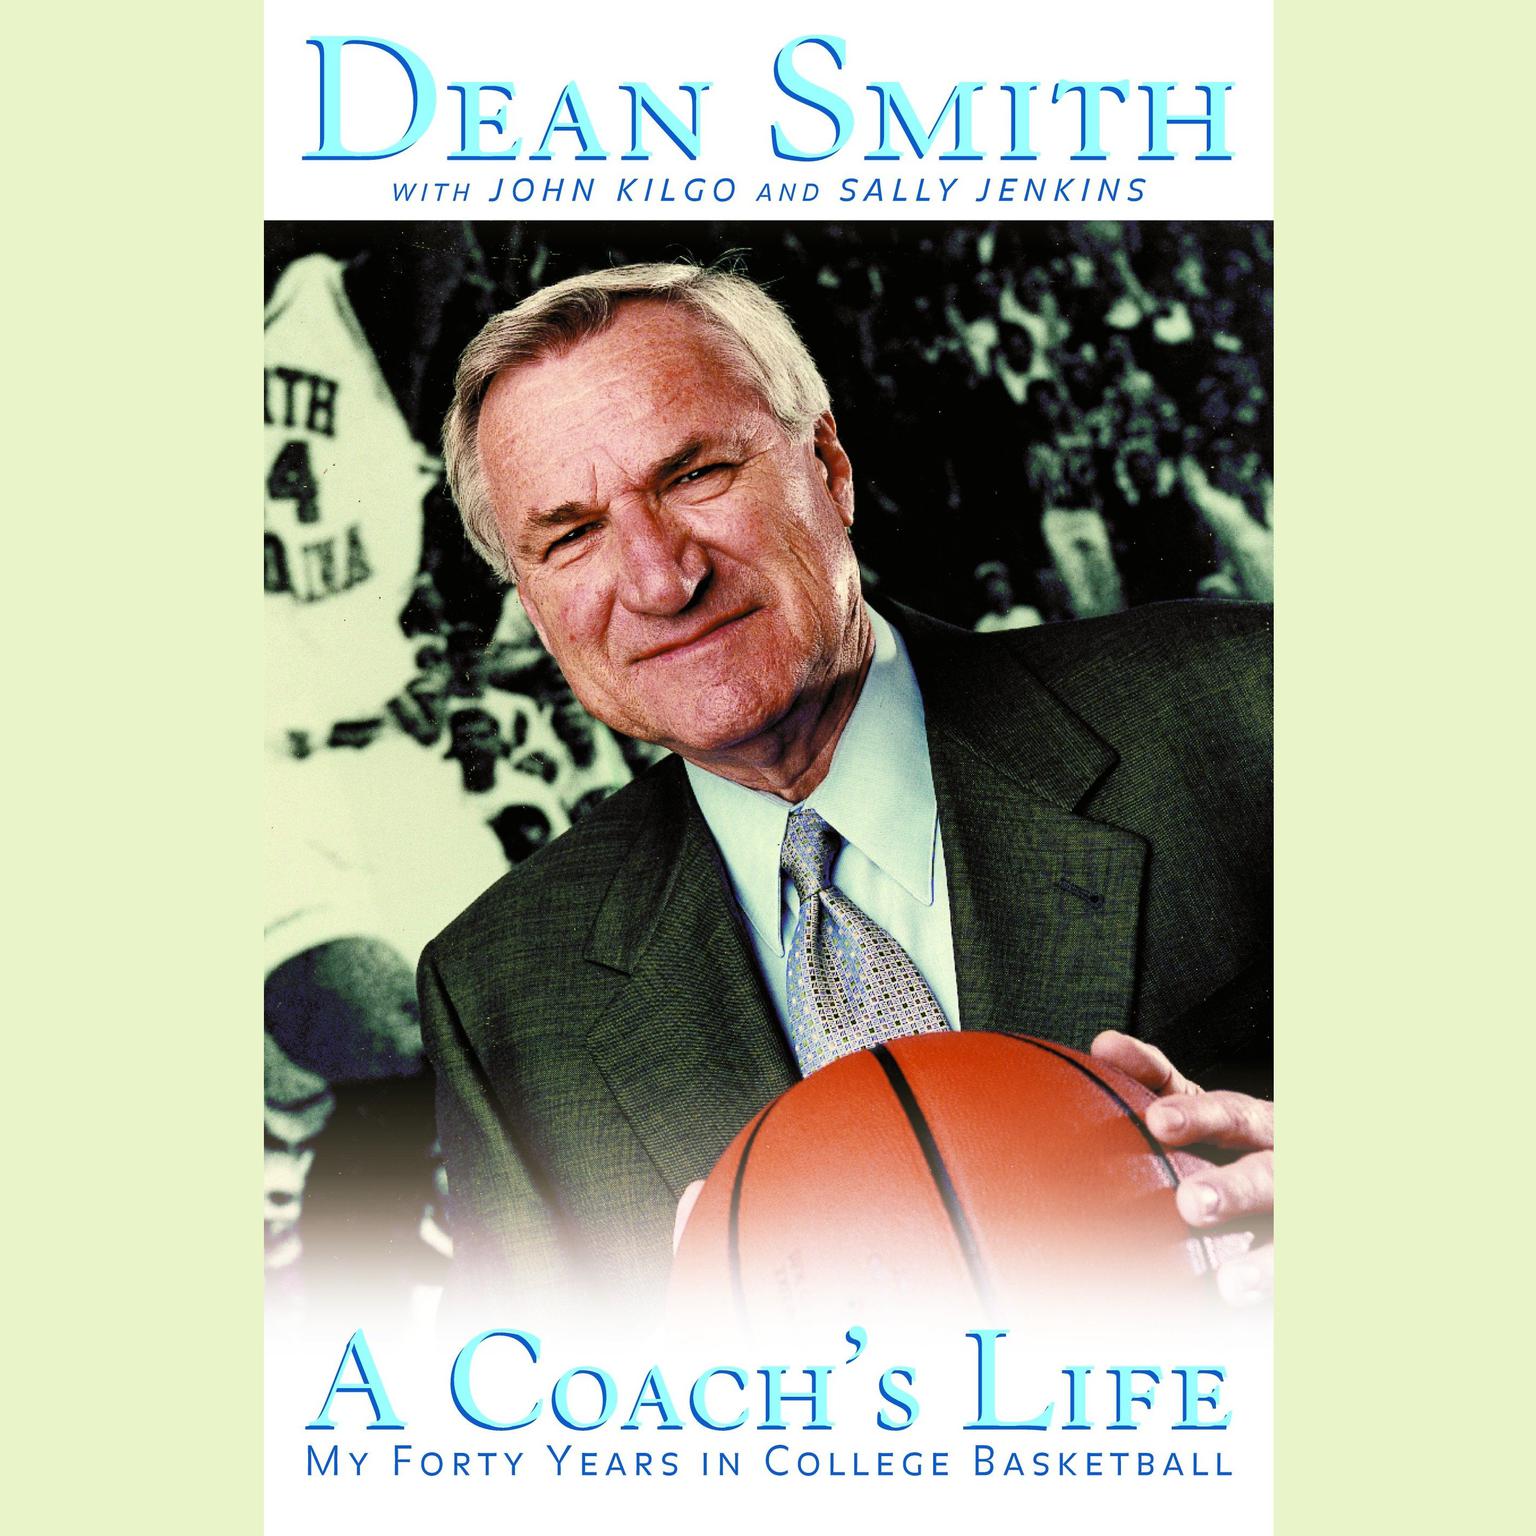 A Coachs Life: My 40 Years in College Basketball Audiobook, by Dean Smith